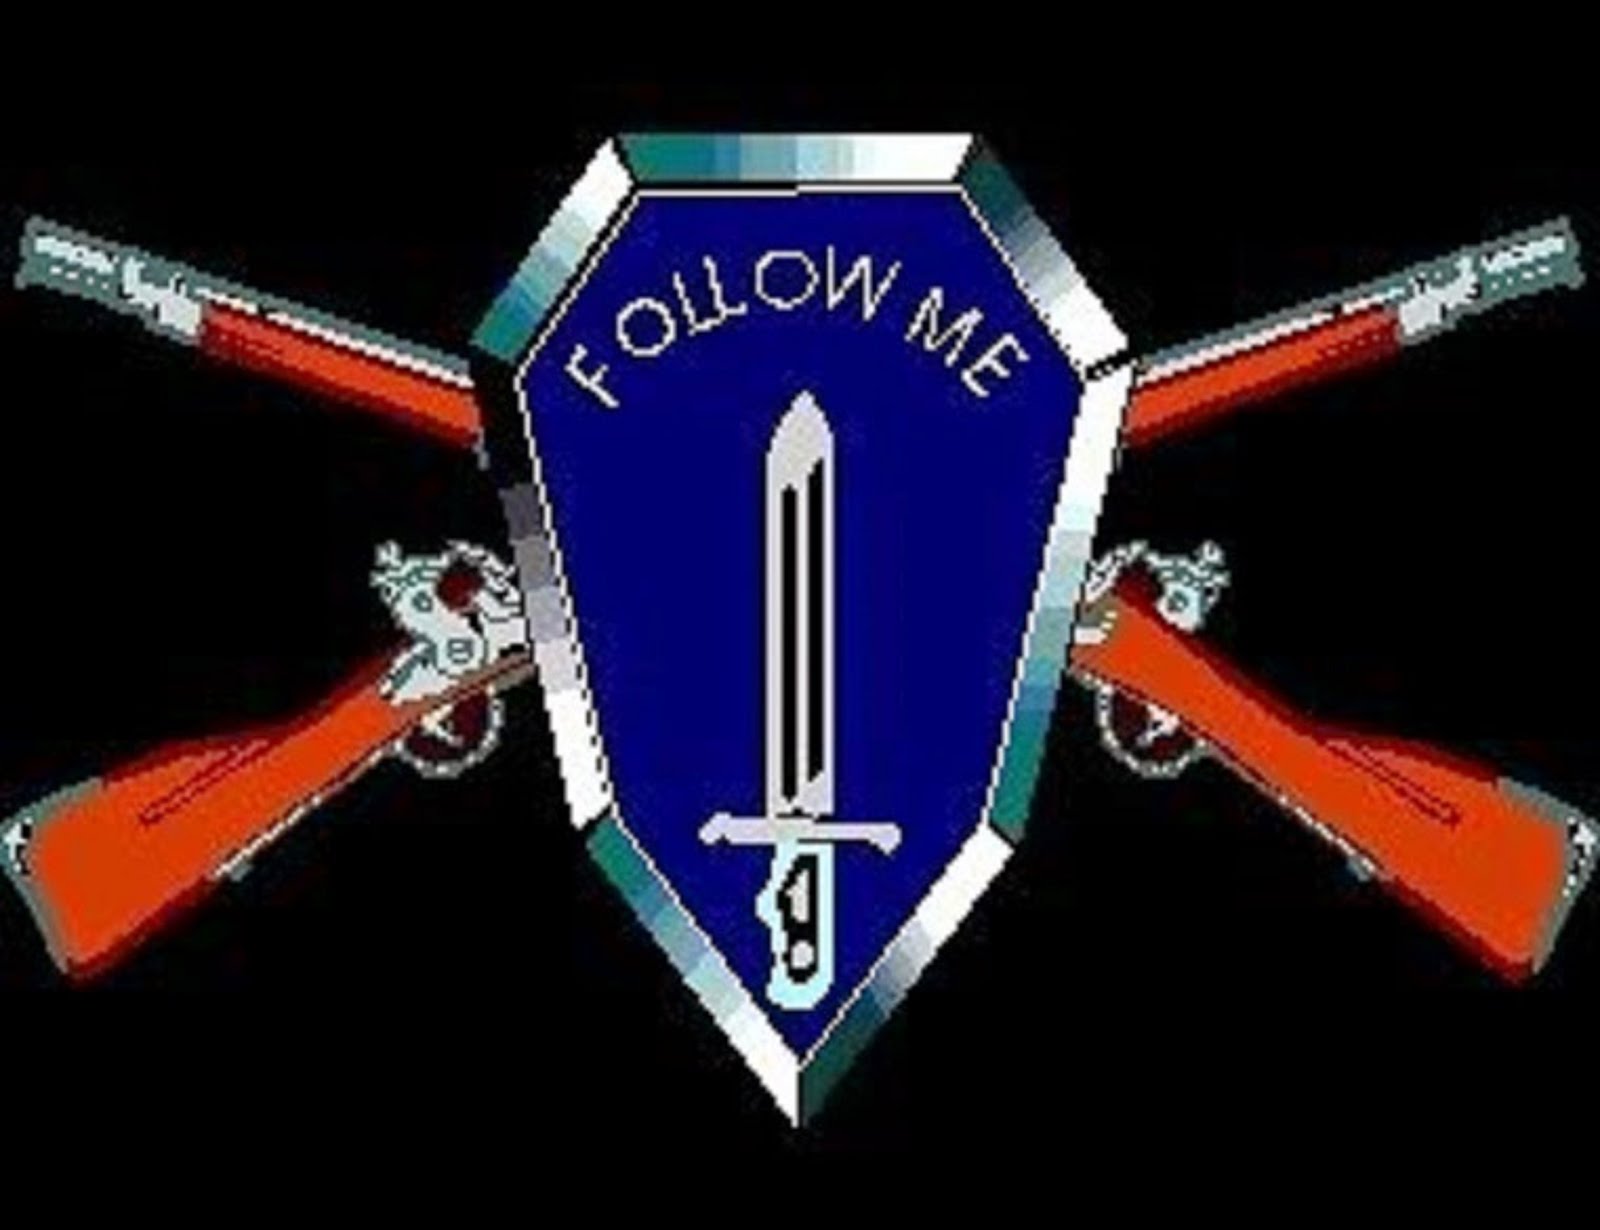 FOLLOW ME - THE INFANTRY MOTTO